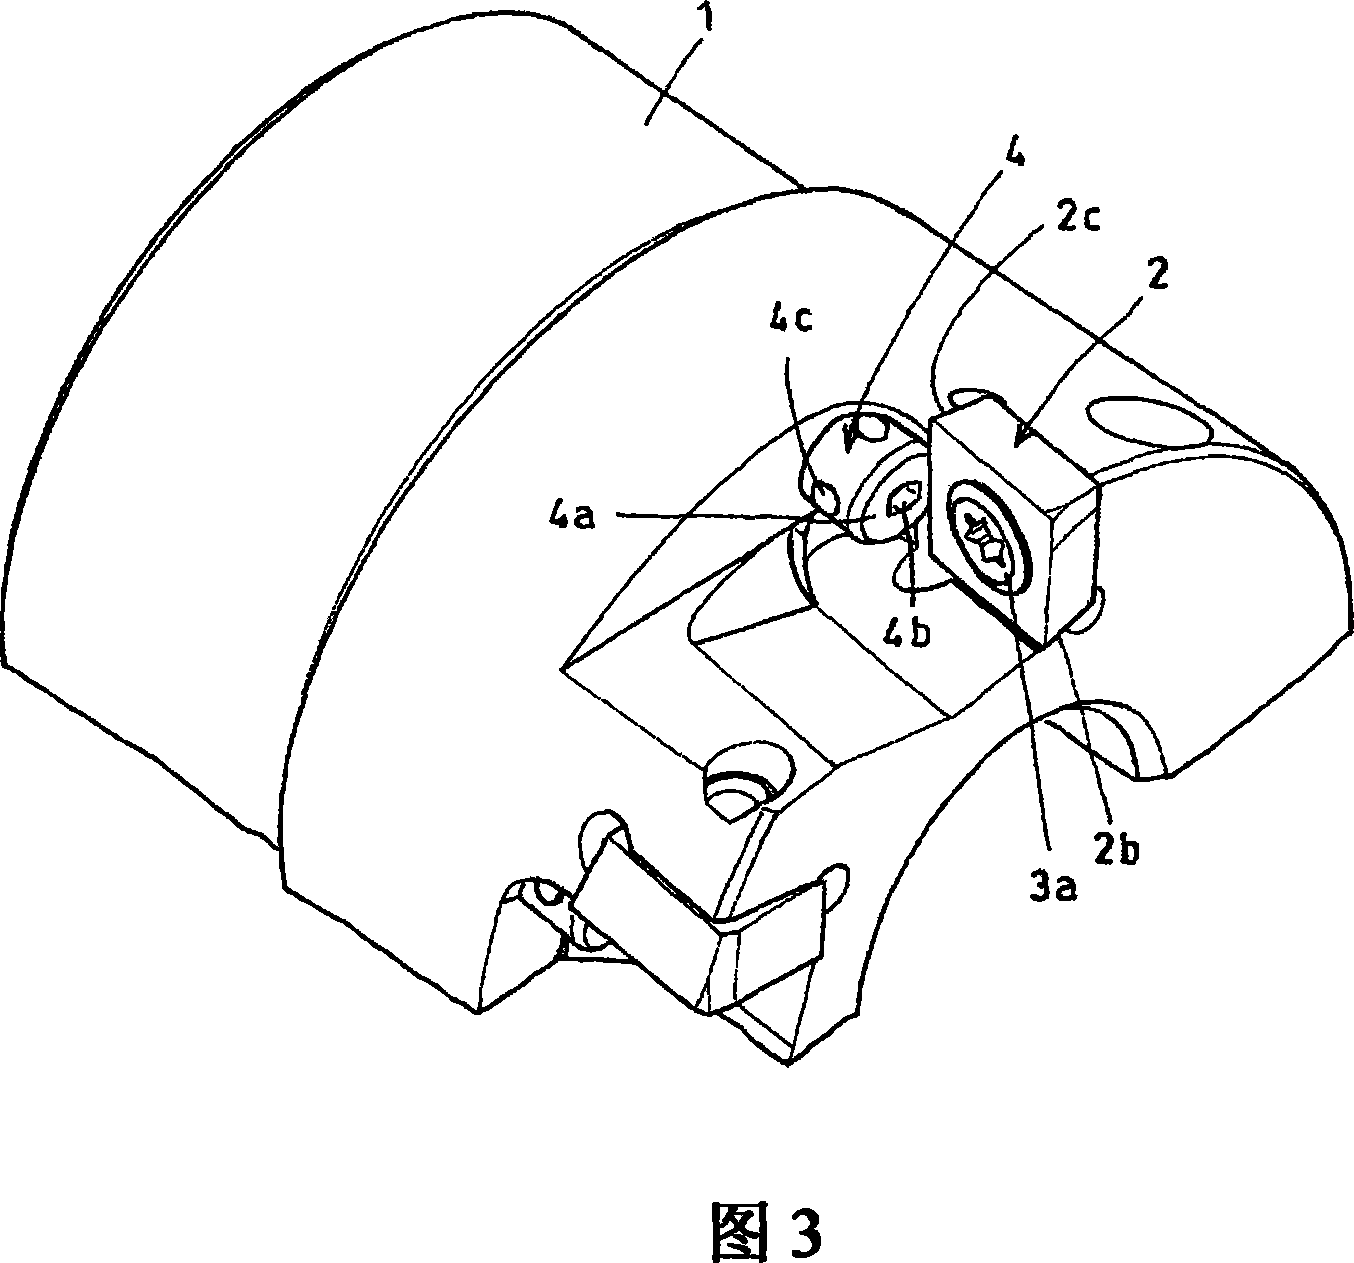 Rotary cutting tool with cutter blade regulation mechanism